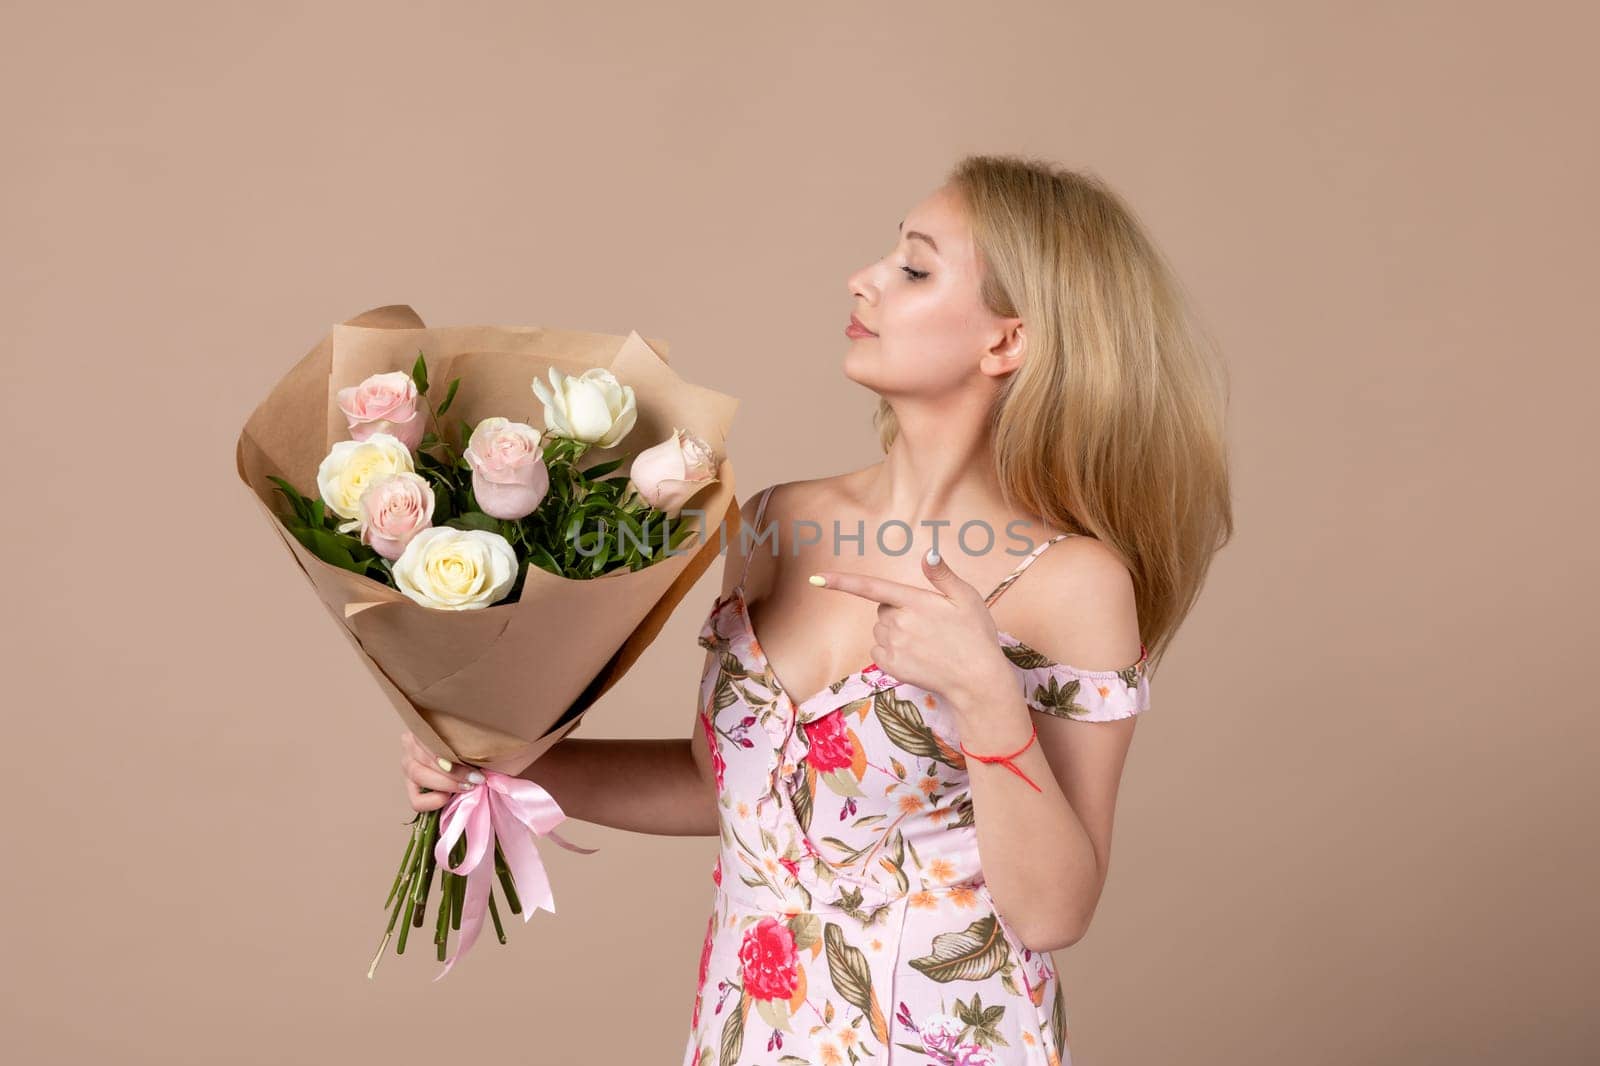 front view young female posing with bouquet of beautiful roses on brown background feminine sensual horizontal march marriage equality woman